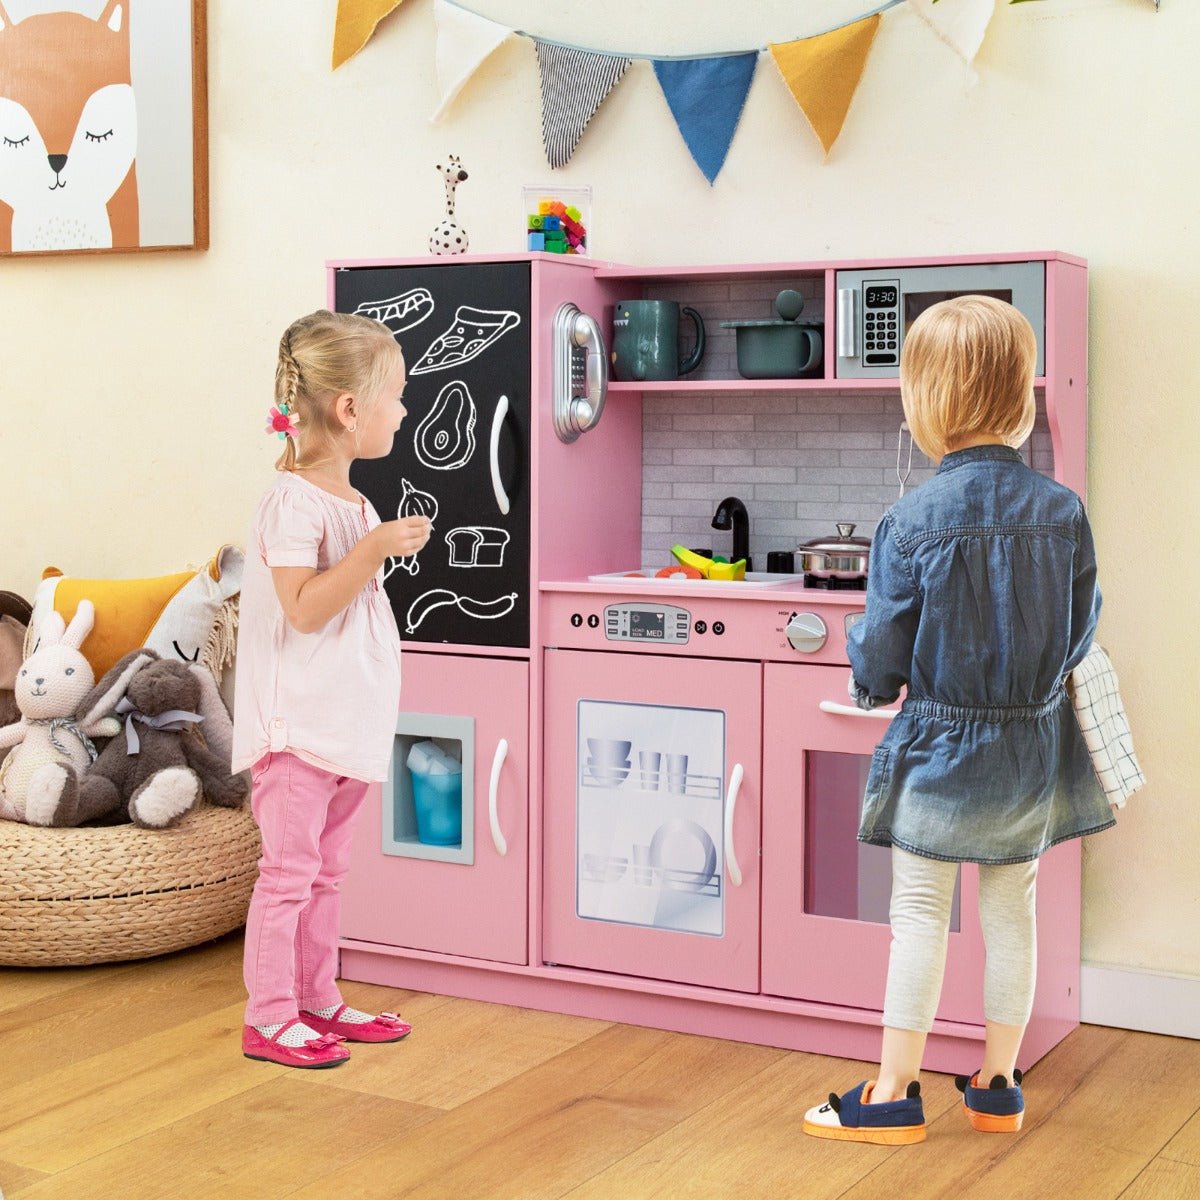 Fun Pink Cooking Playset with Sink and Stove